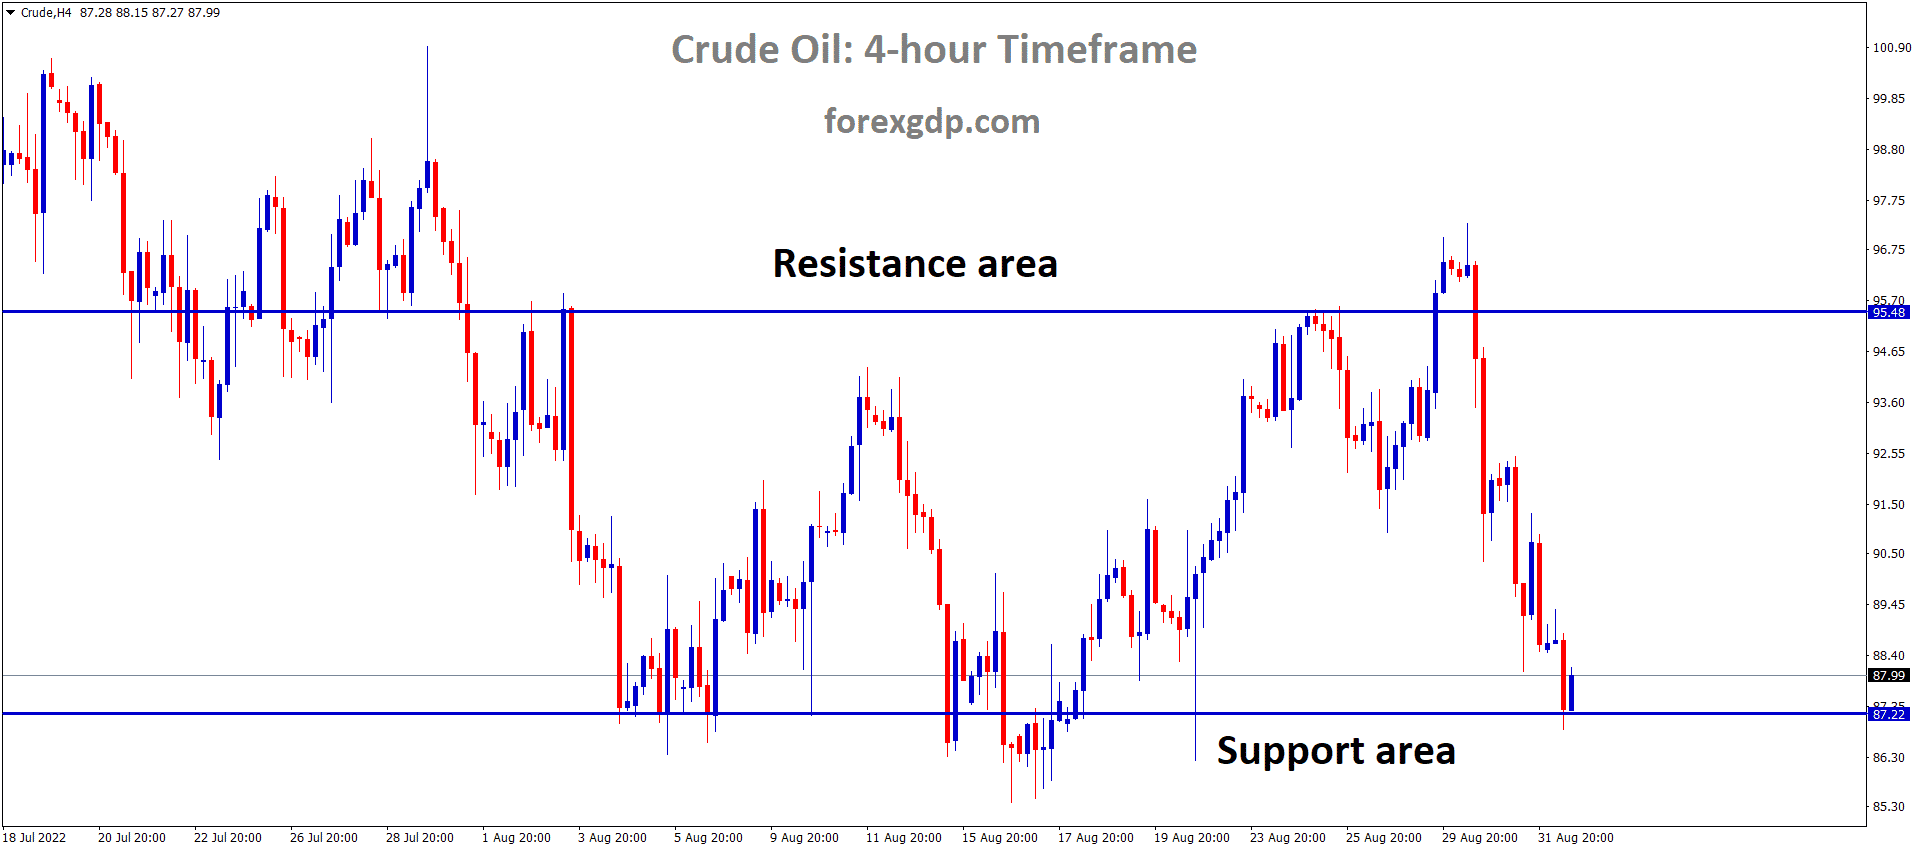 Crude Oil is moving in the Box Pattern and the market has reached the horizontal support area of the pattern